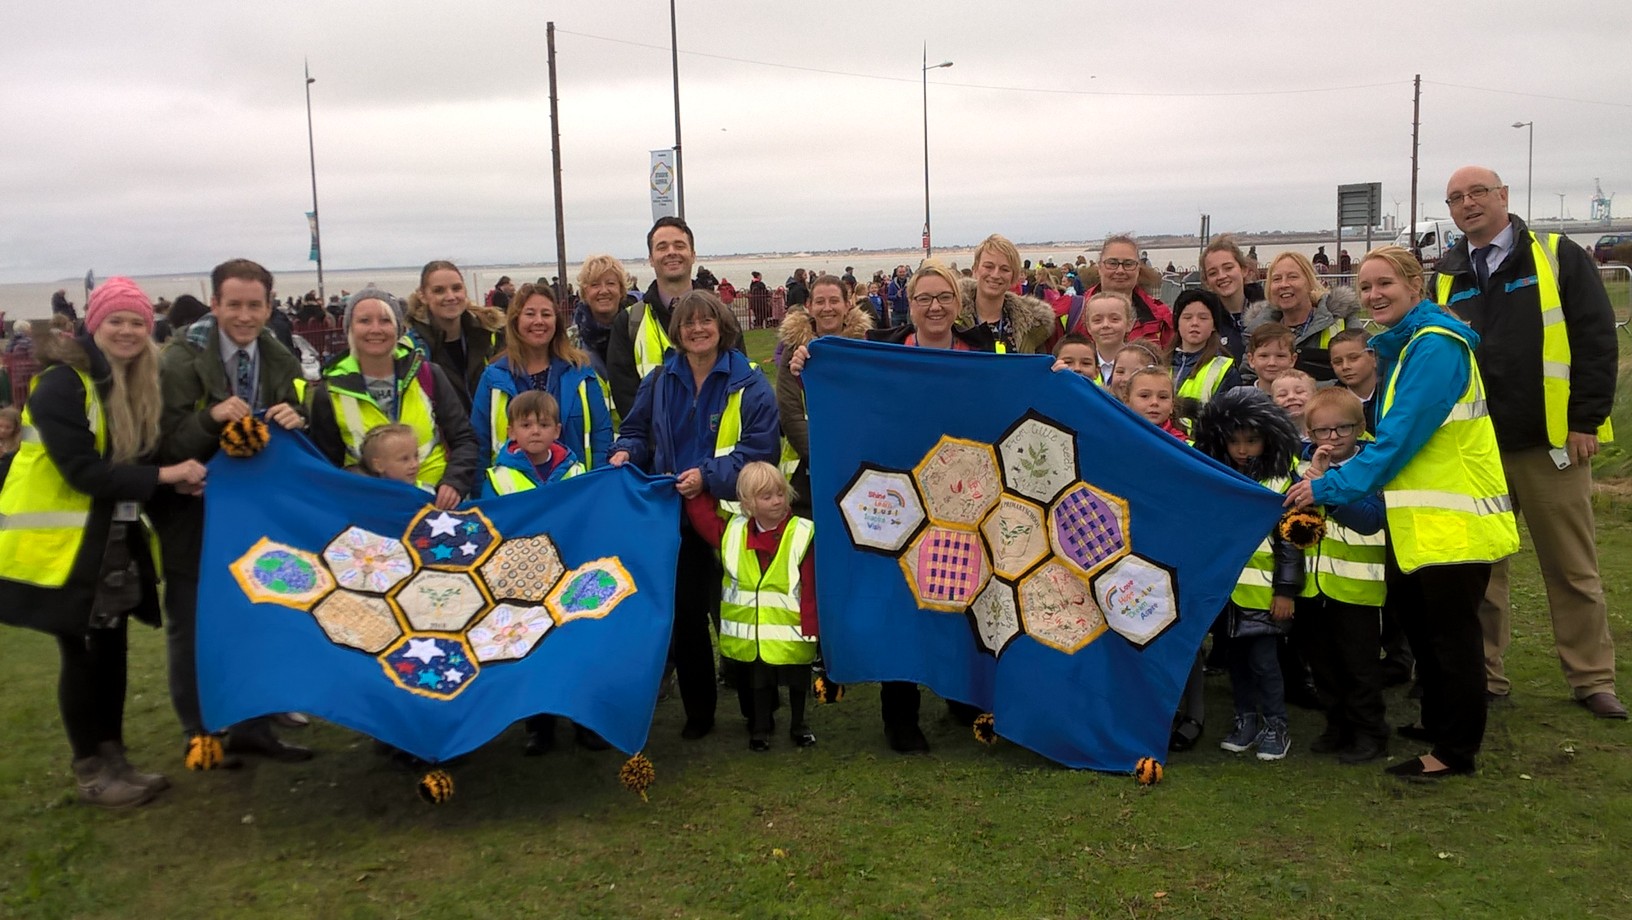 school children in wirral holding up their giant artworks featuring their dreams flanked by two teachers in high vis